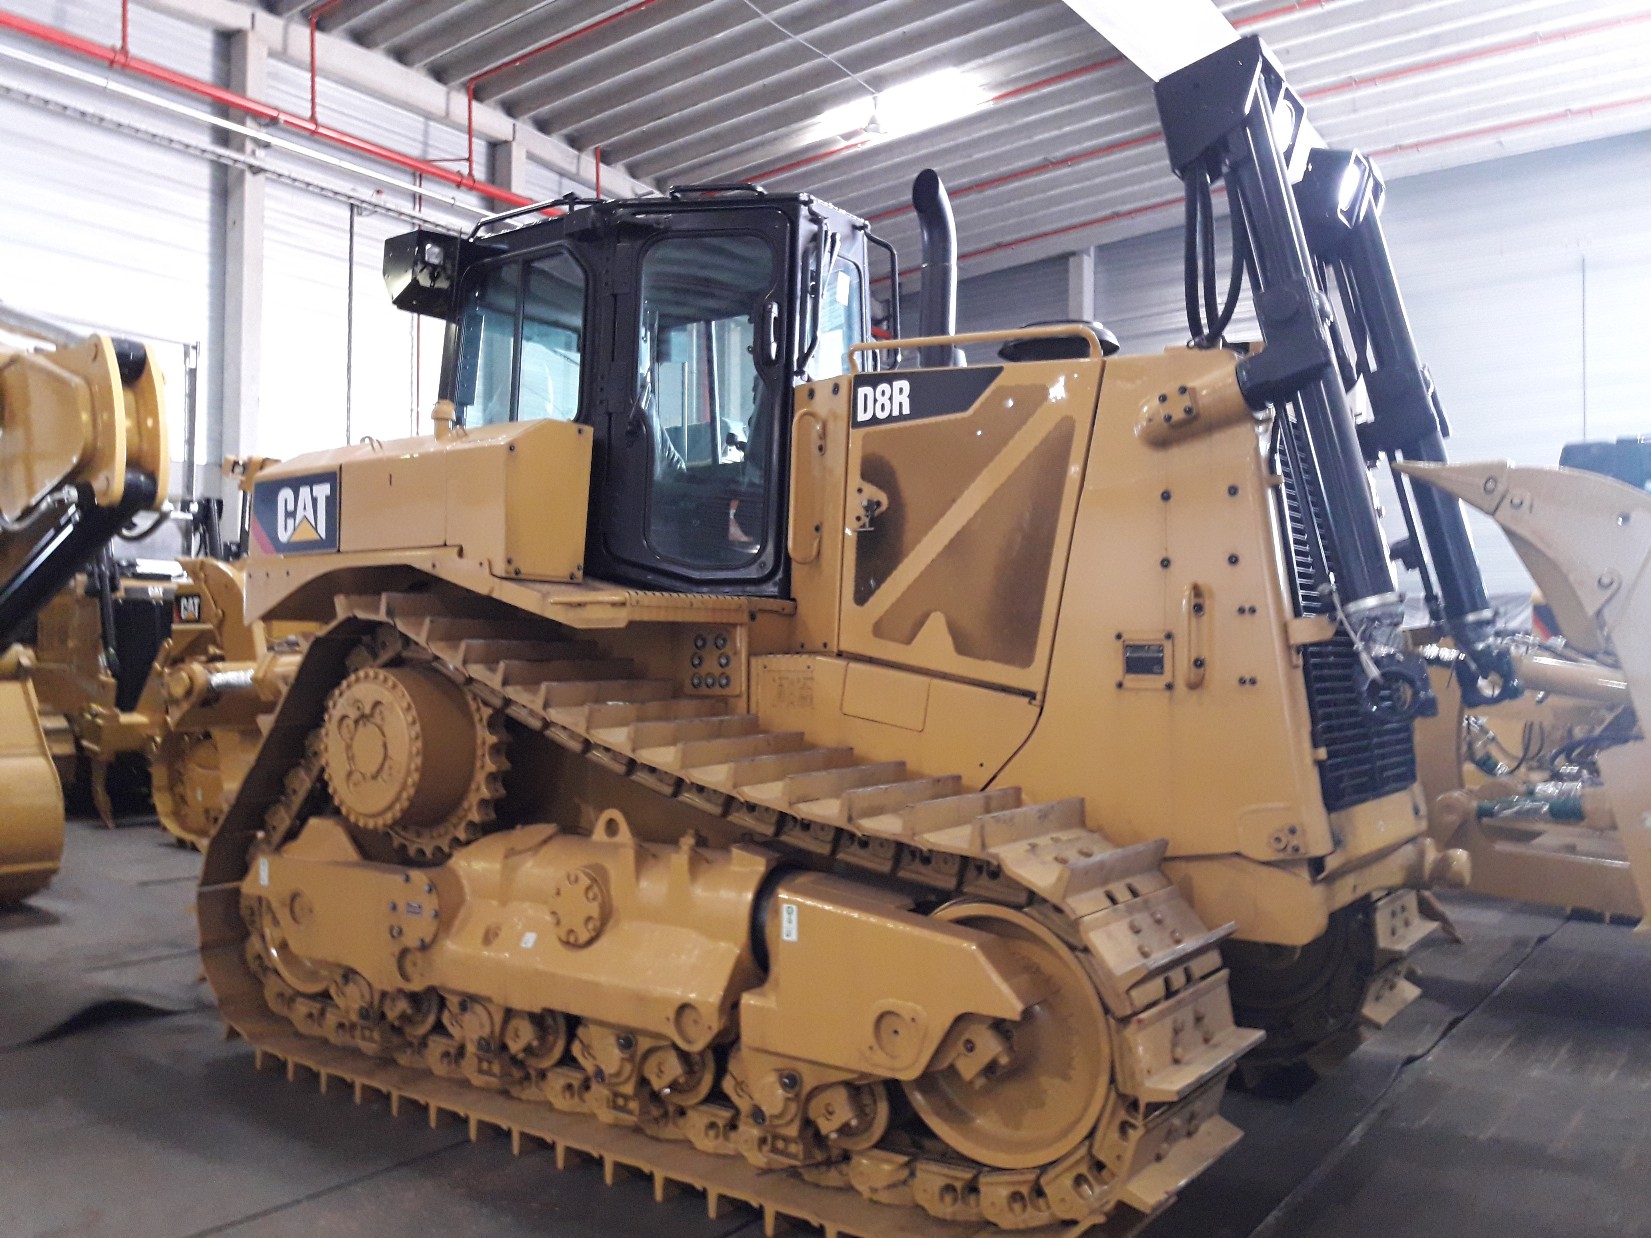 CATERPILLAR D8R for sale in the UK